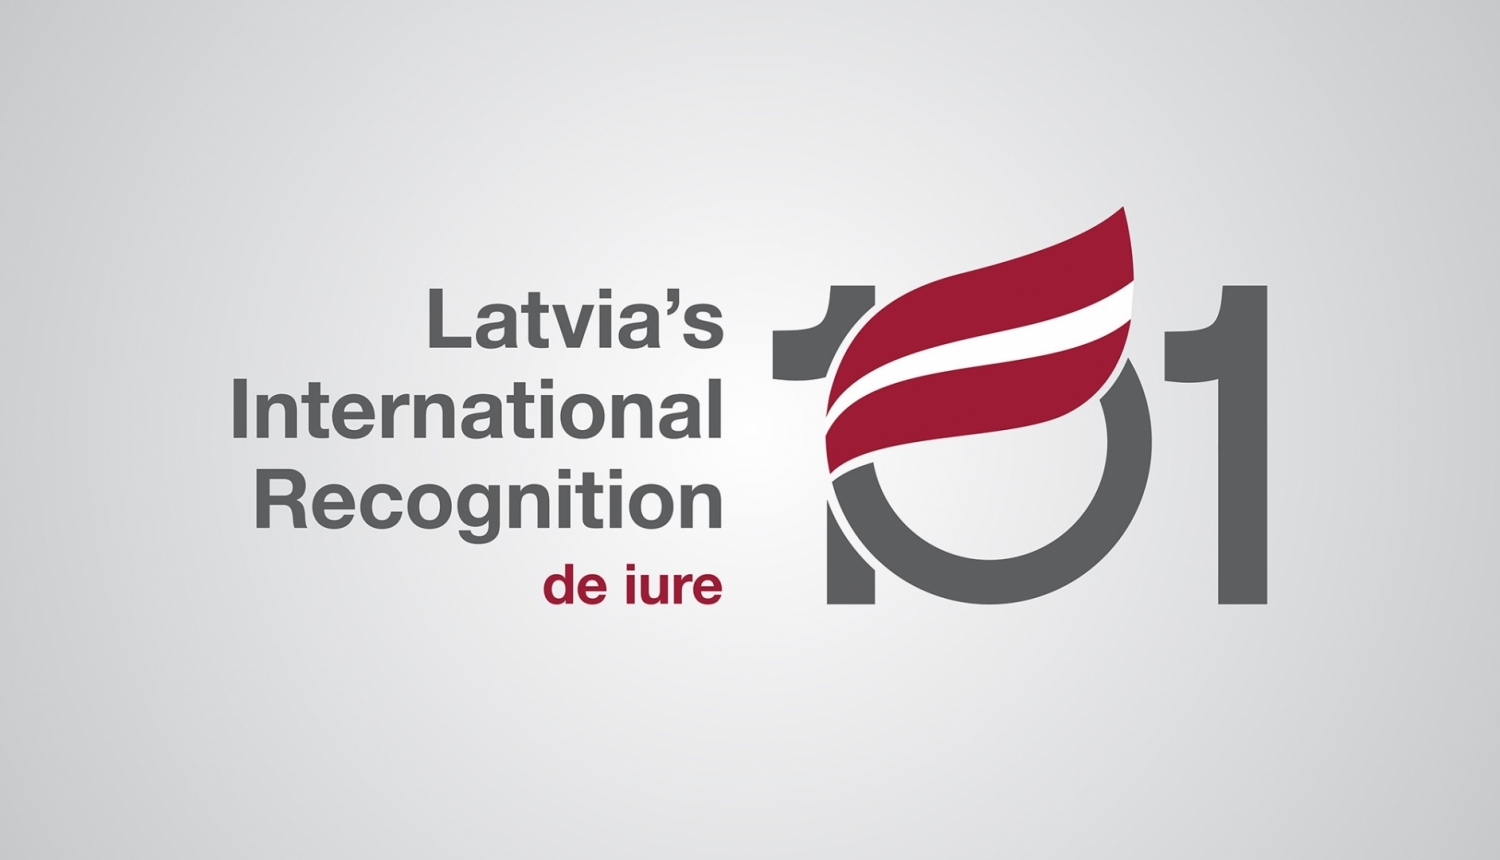 the anniversary of international (de jure) recognition of the Republic of Latvia